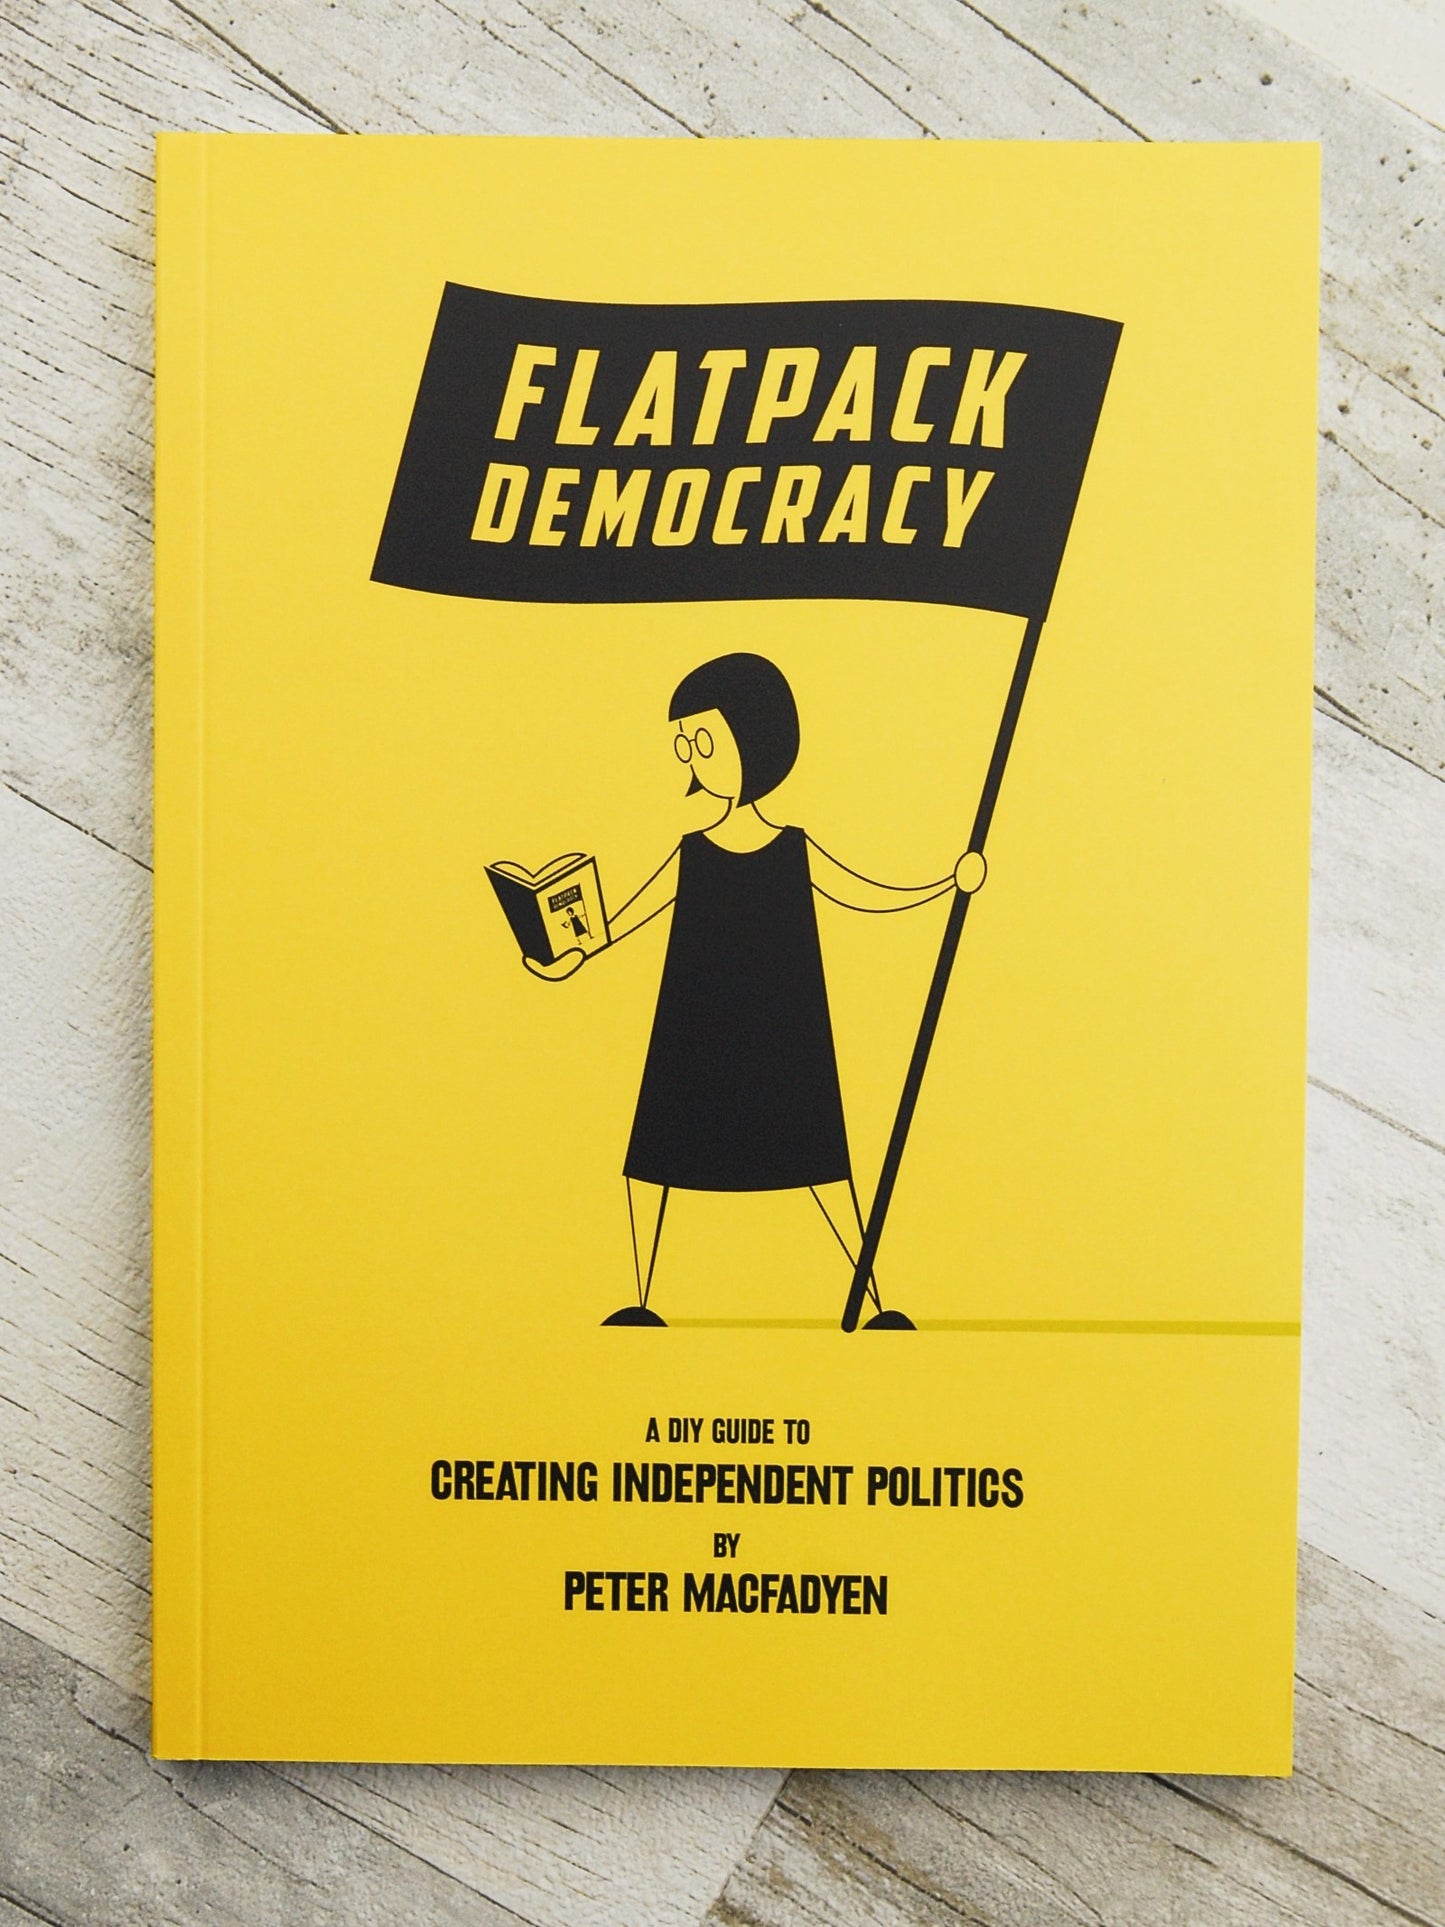 Flatpack Democracy: A DIY Guide for Creating Independent Politics